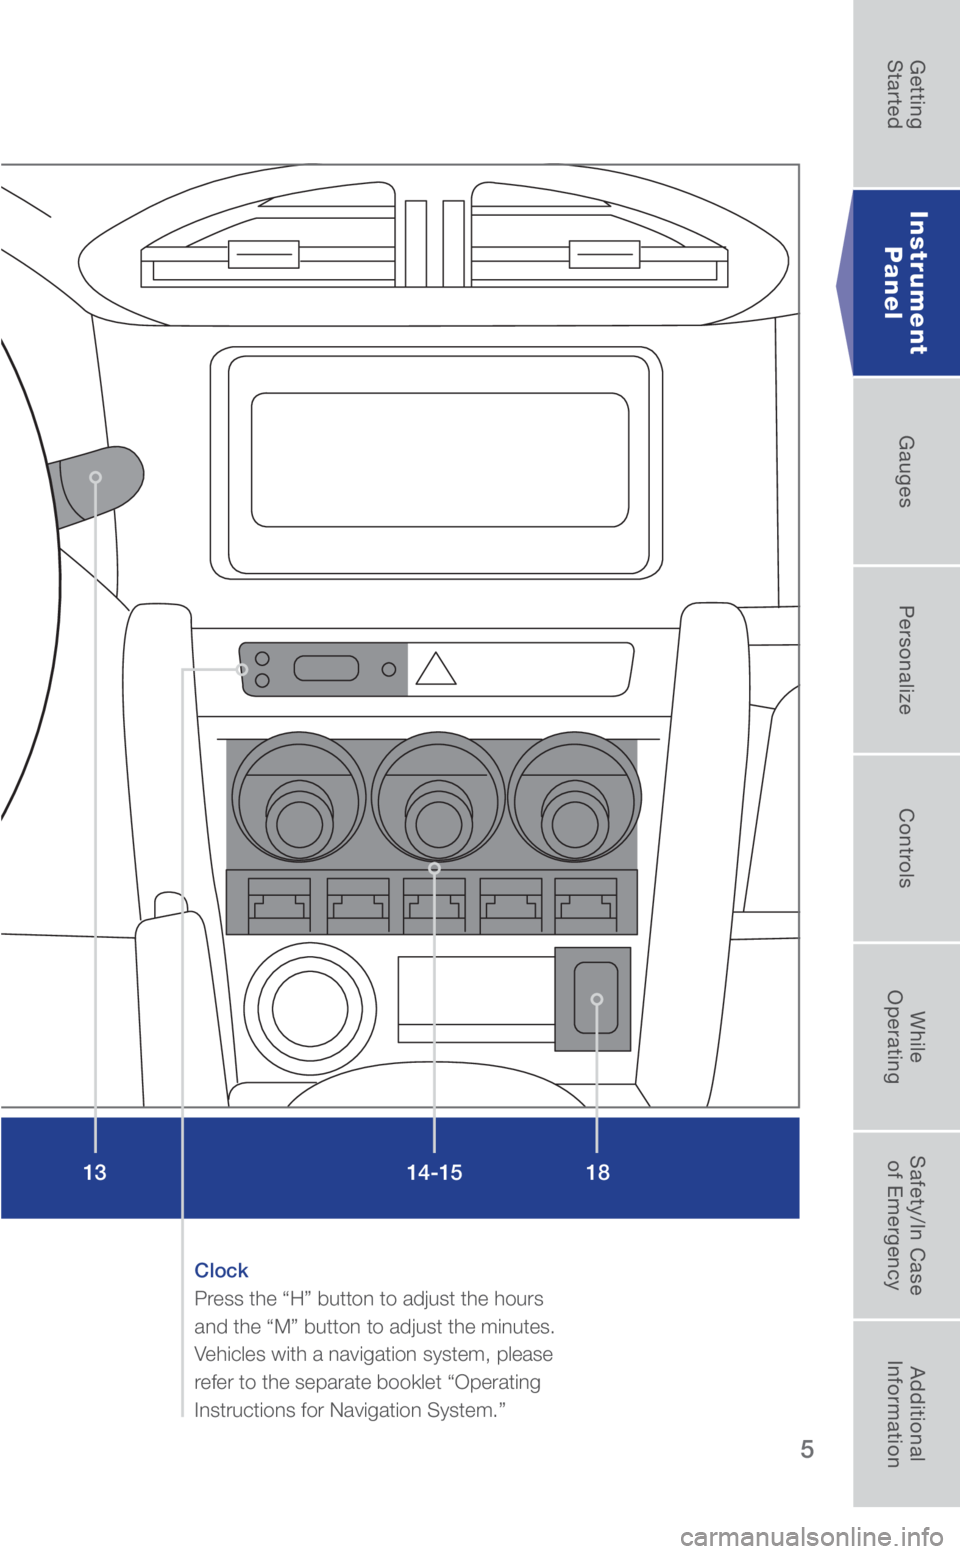 SUBARU BRZ 2018  Quick Guide 5
Clock 
Press the “H” button to adjust the hours 
and the “M” button to adjust the minutes. 
Vehicles with a navigation system, please 
refer to the separate booklet “Operating 
Instruction